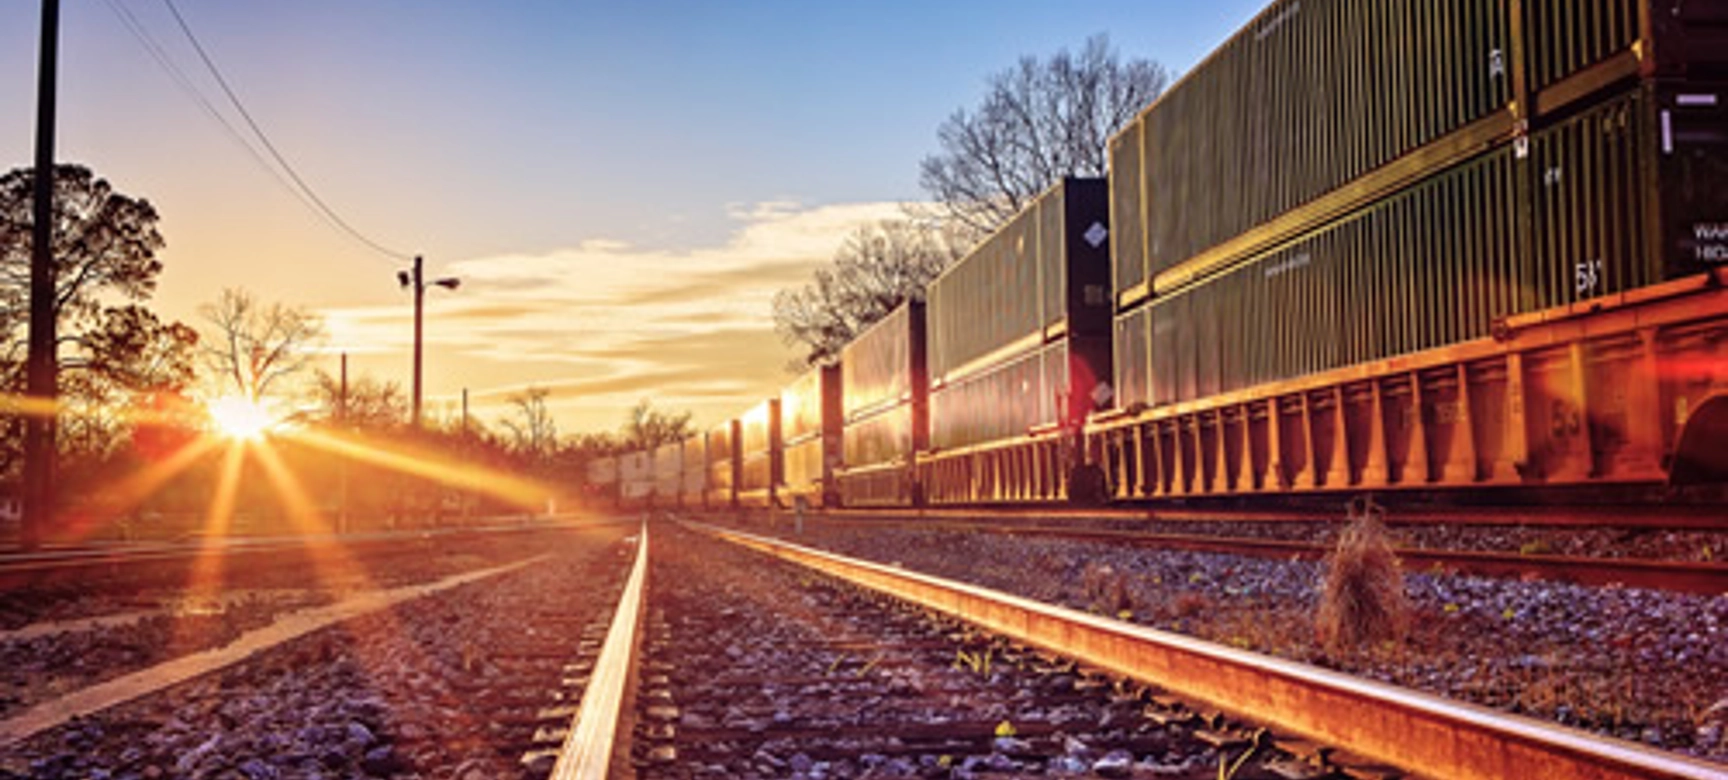 Smiths Detection wins contract with U.S. Customs and Border Protection for rail cargo inspection solutions (1)